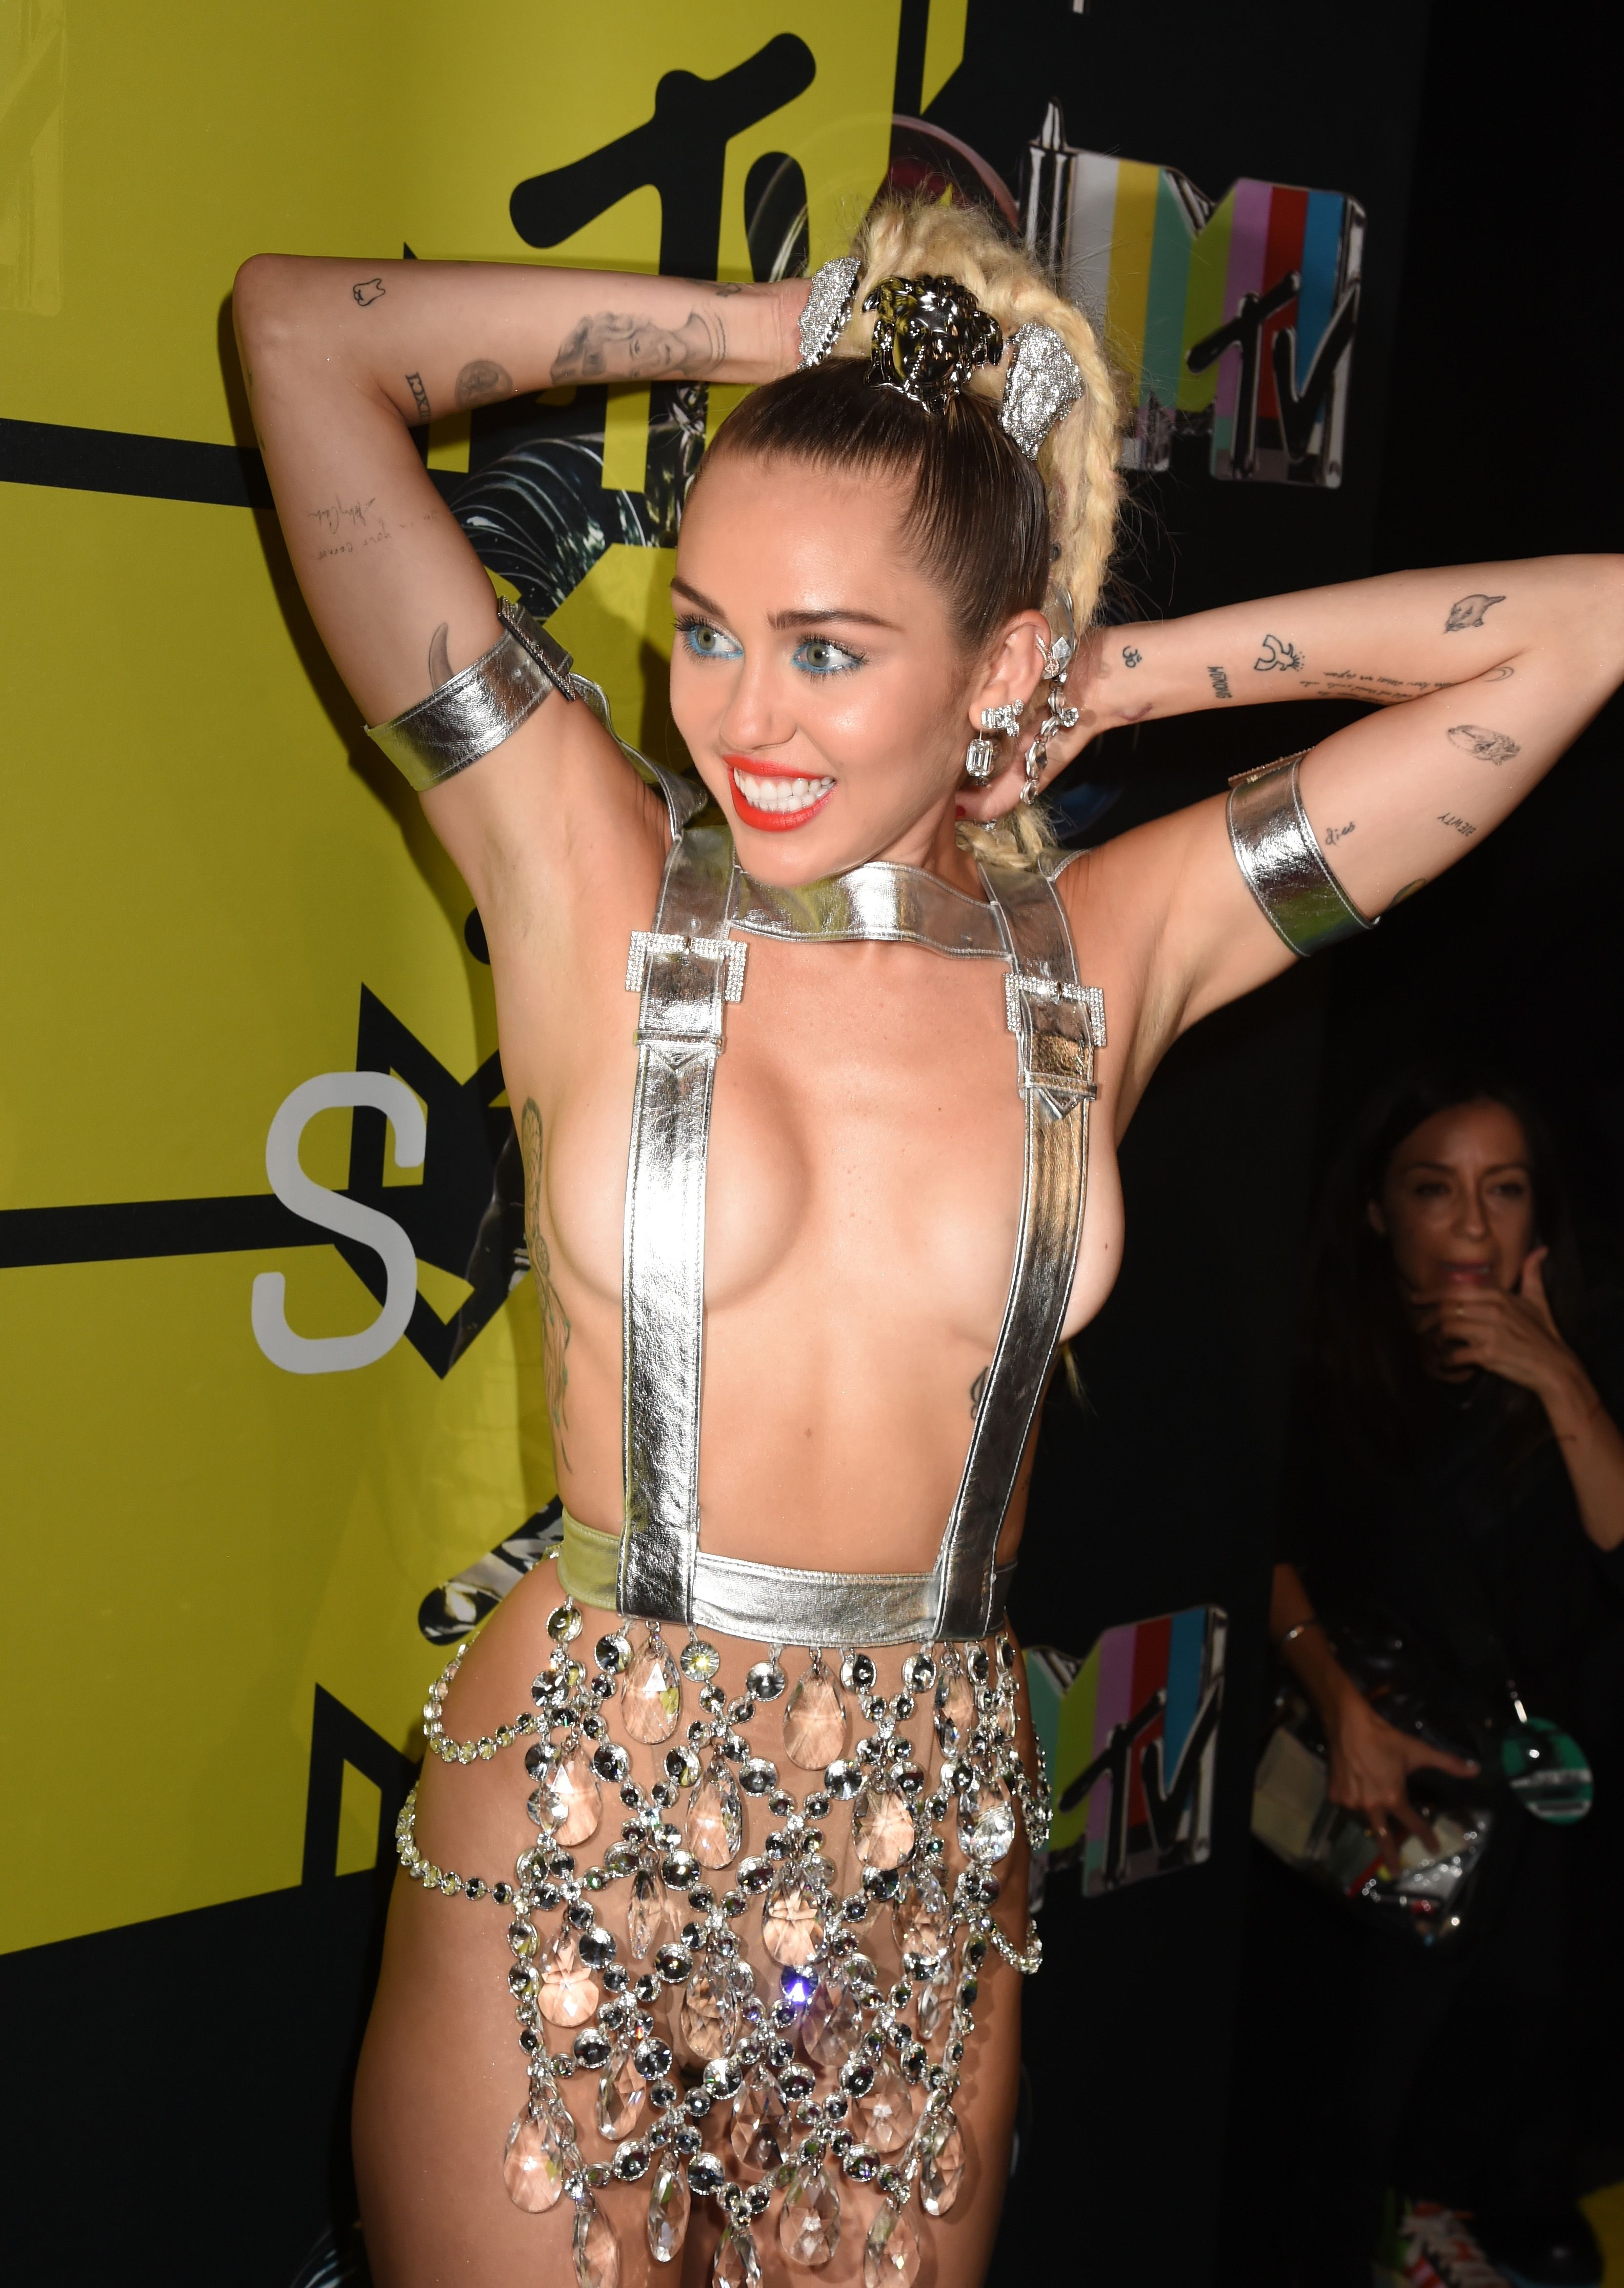 Miley Cyrus Nude Porn - Miley Cyrus's Tattoos - Photos and Meaning of Miley Cyrus' Tattoos